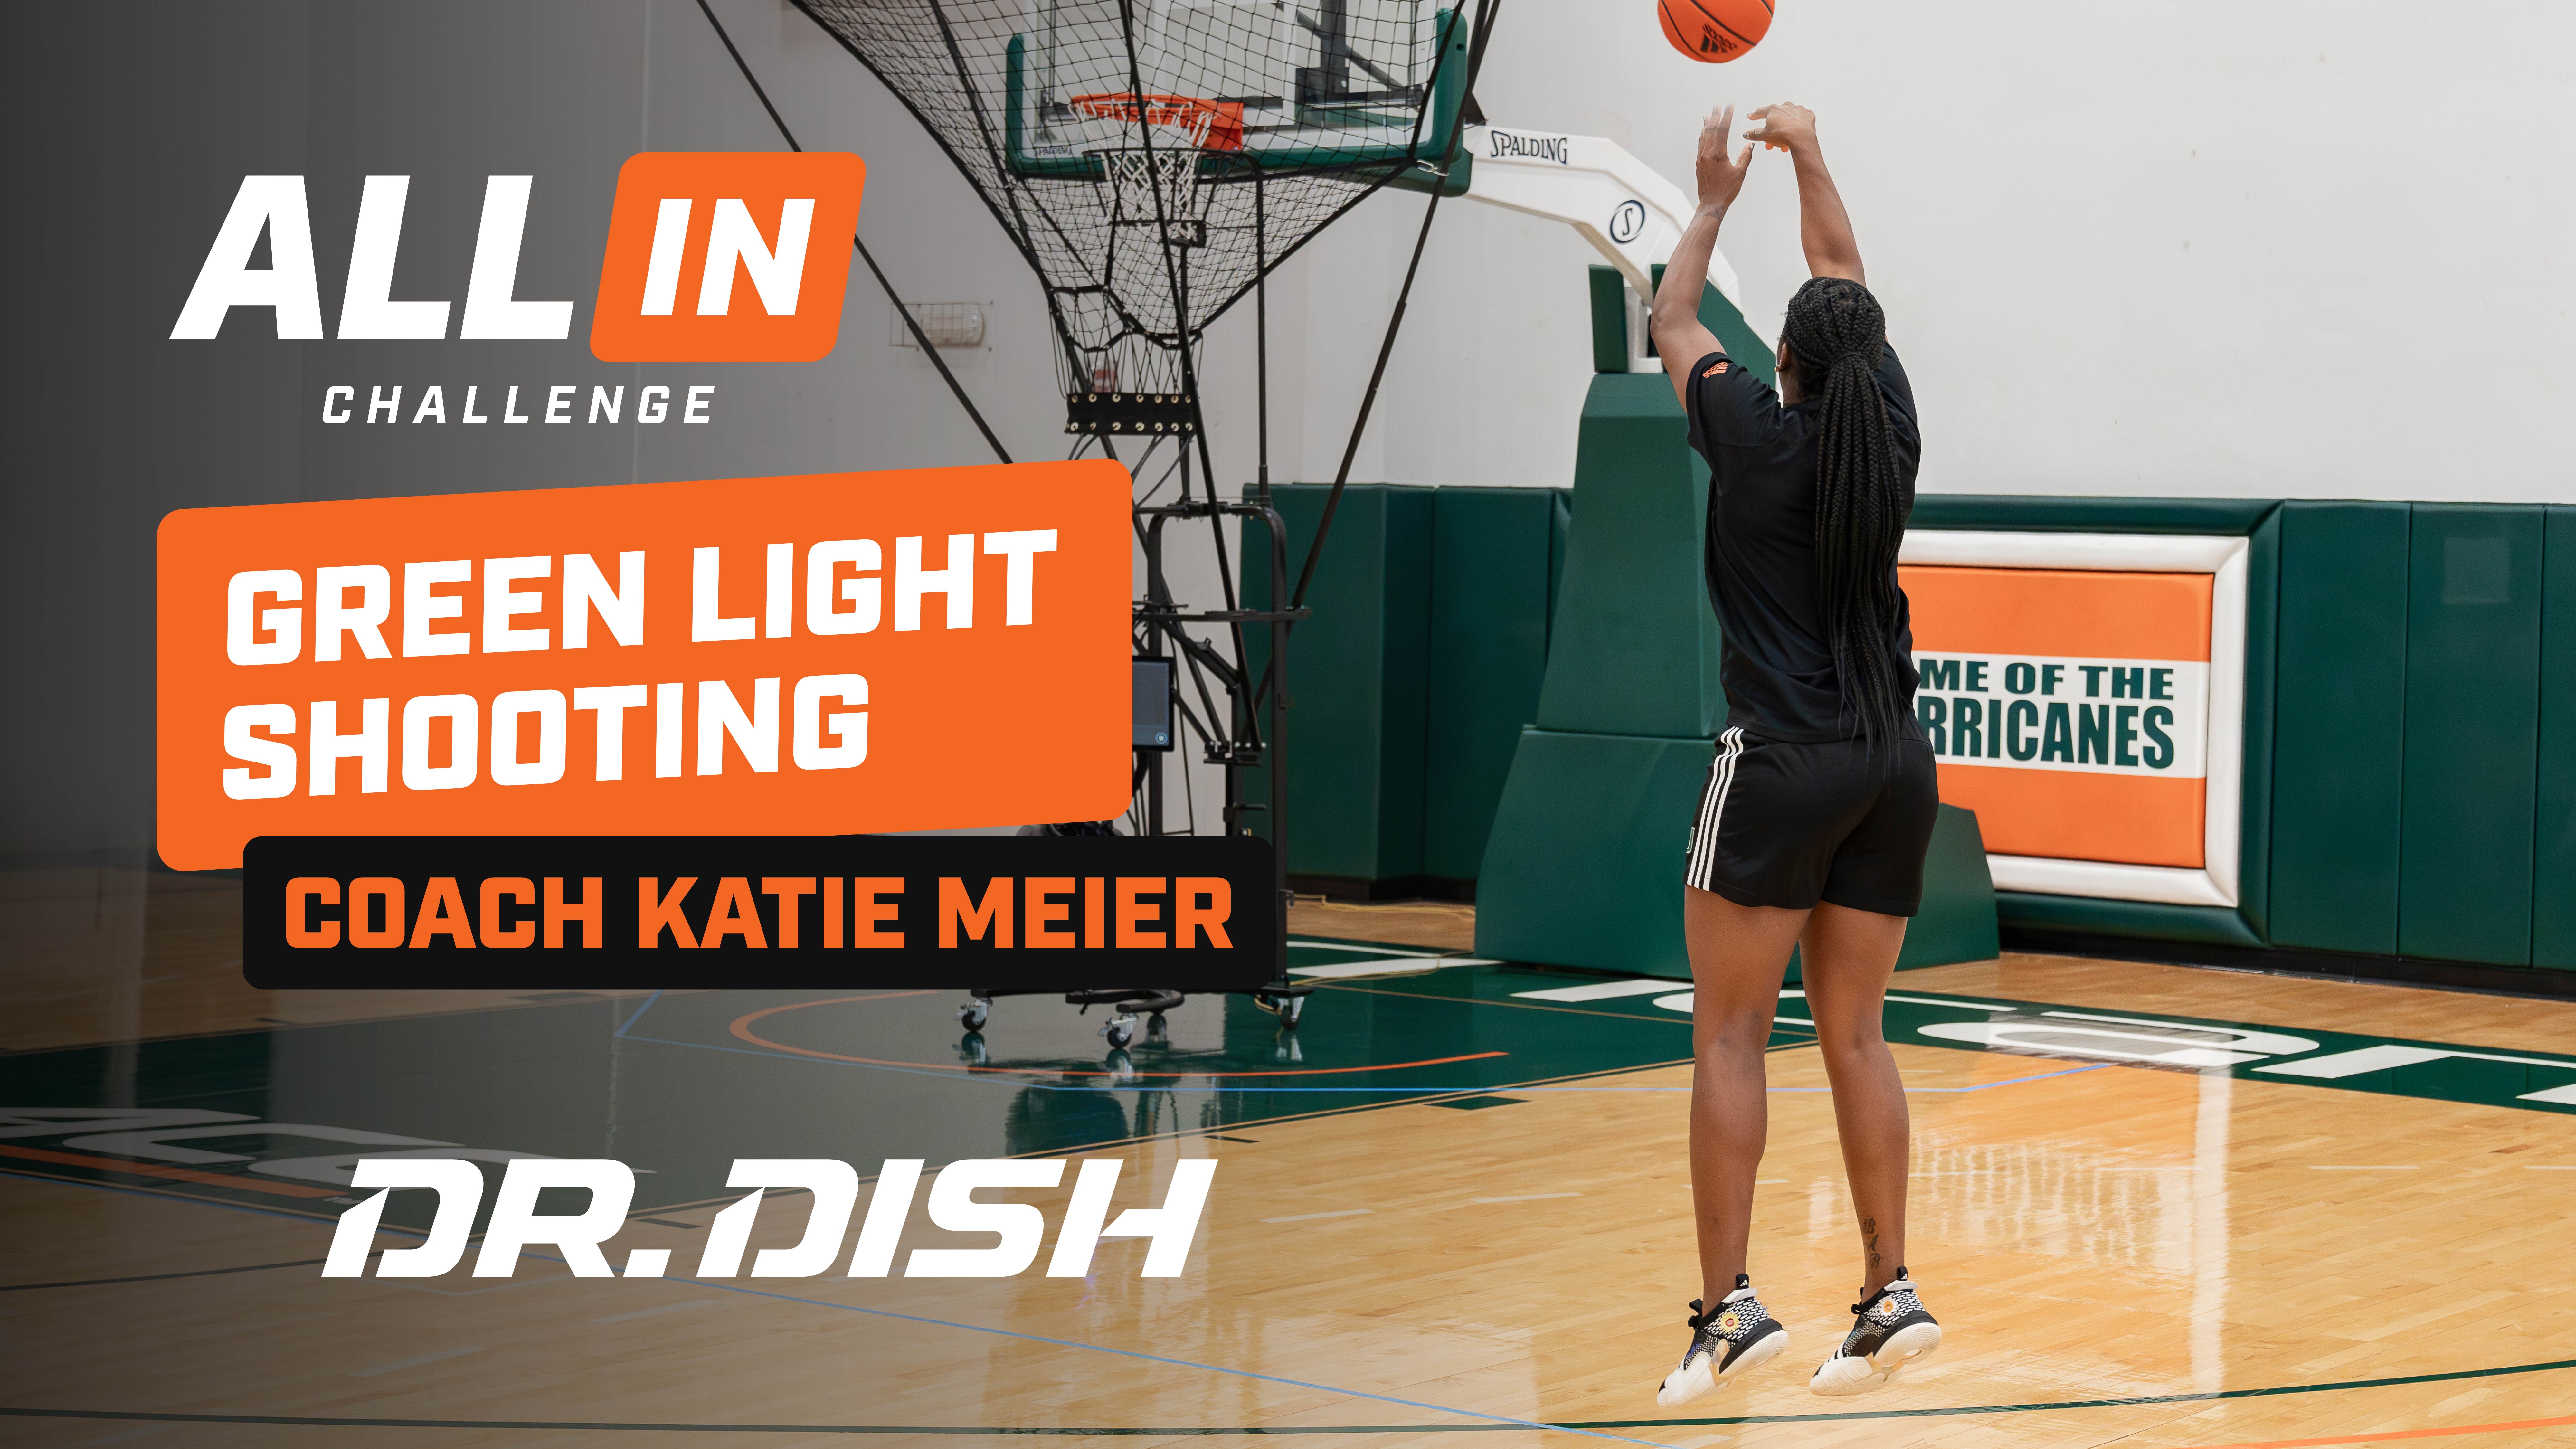 Green Light Basketball Shooting Challenge with Coach Katie Meier